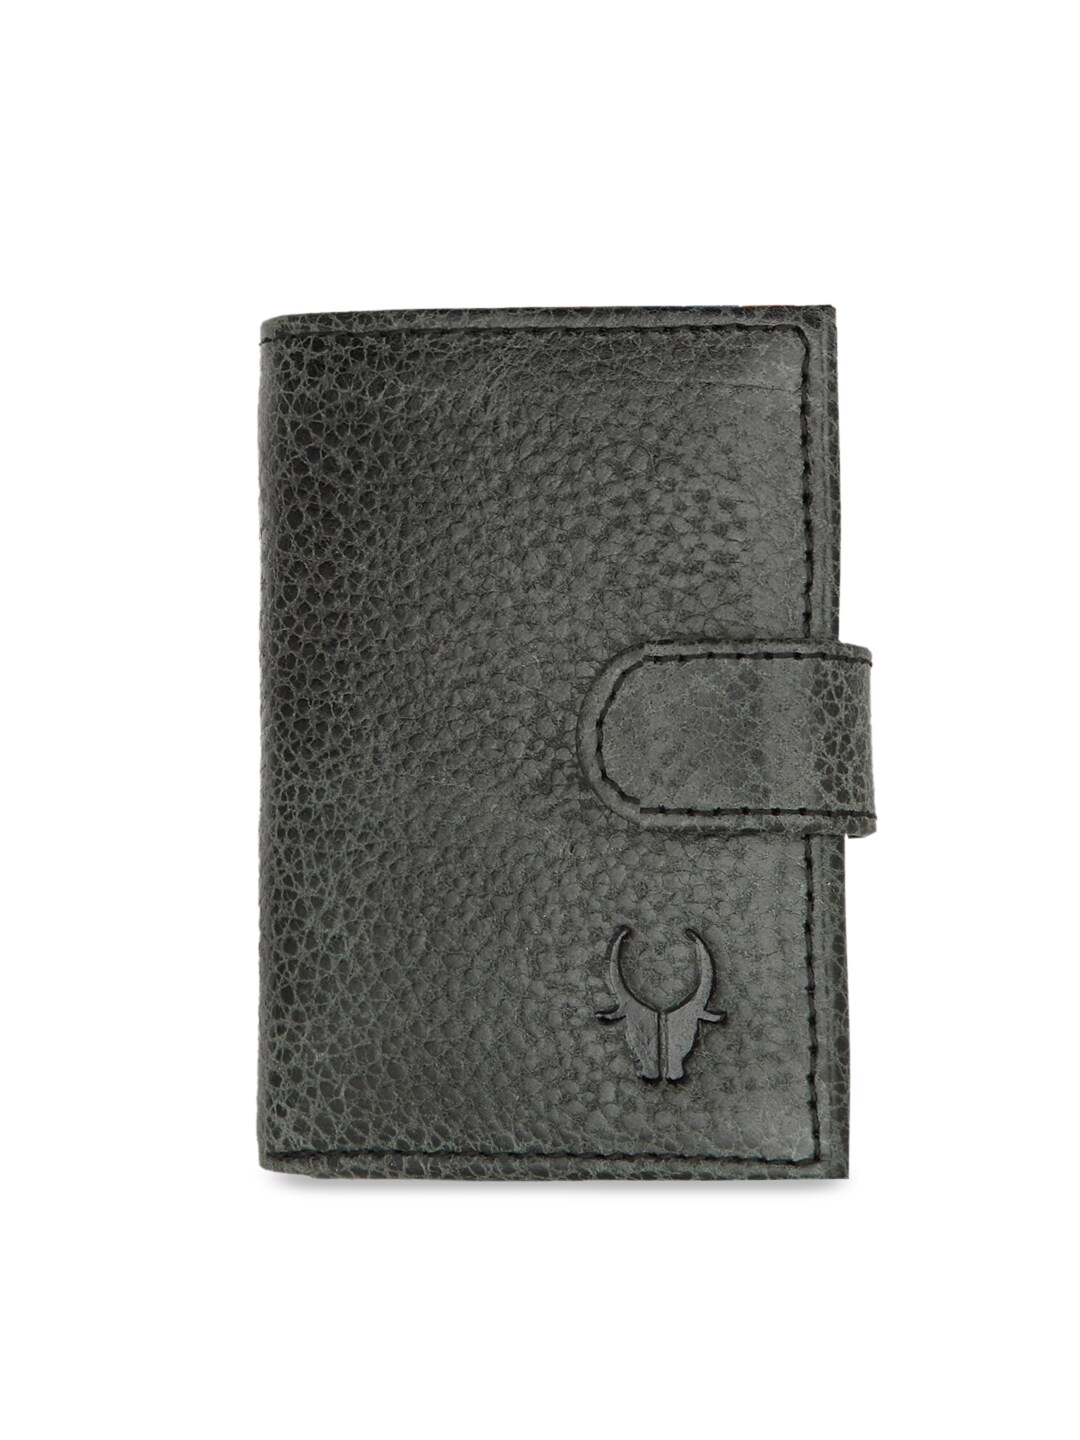 WildHorn Unisex Black Textured RFID Protected Leather Card Holder Price in India